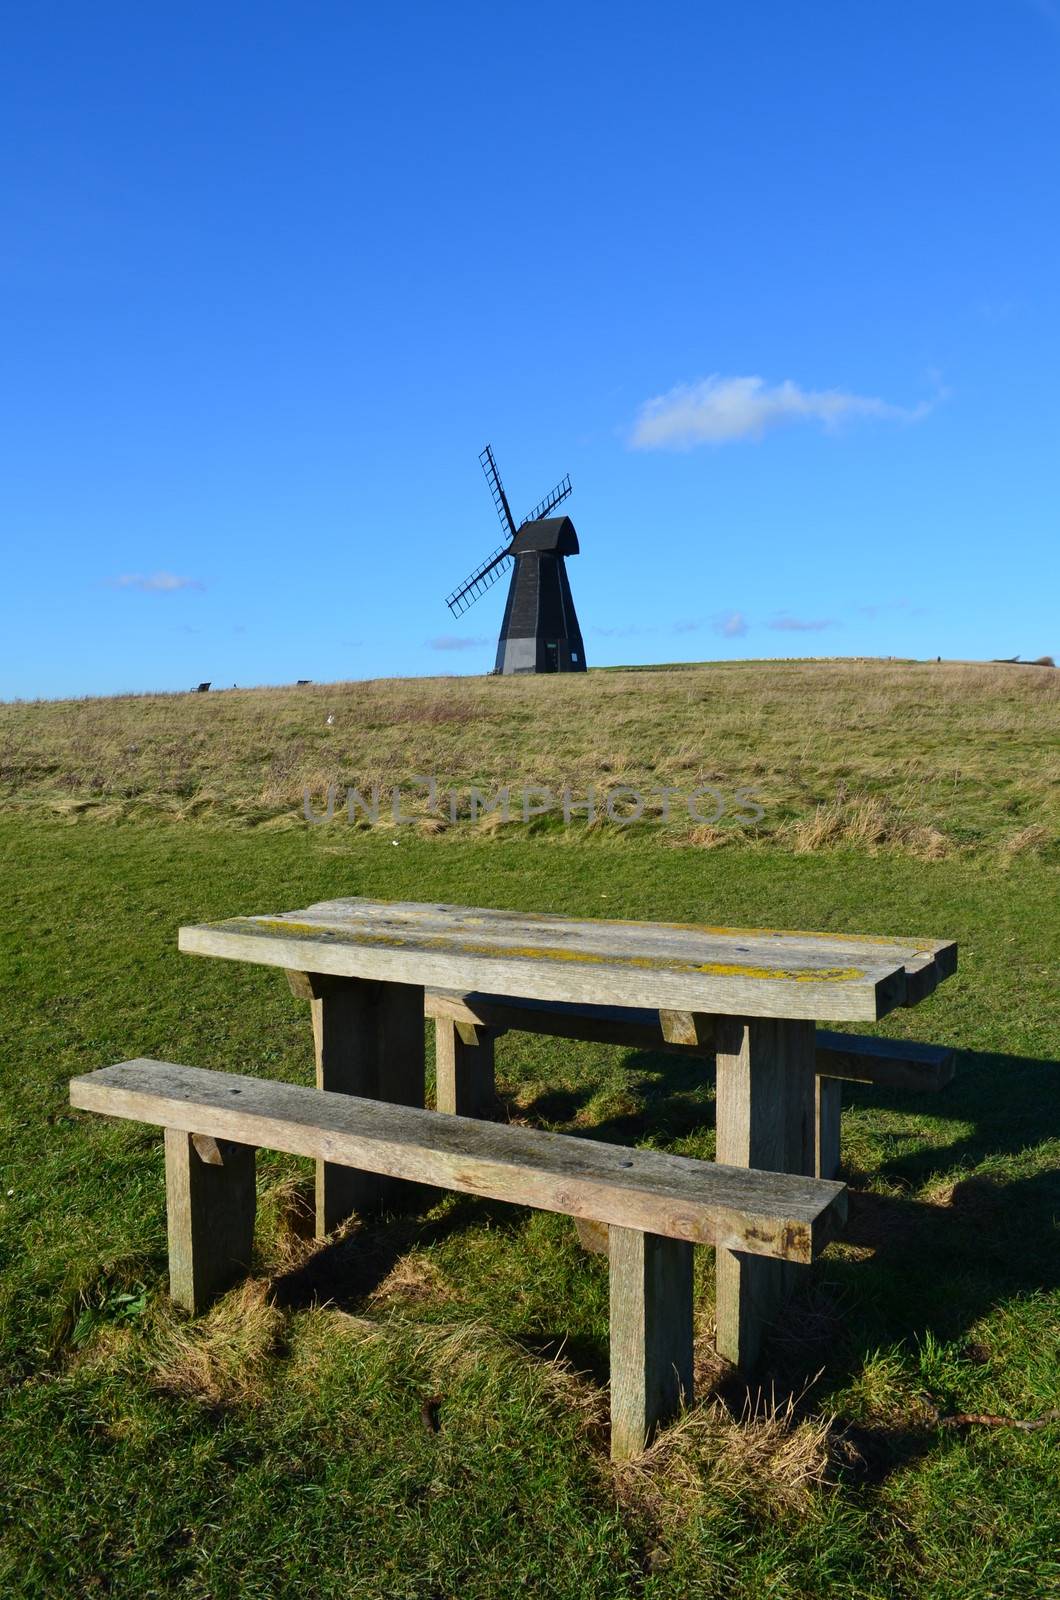 Wood picnic table and bench with a traditional Sussex Smock windmill in the background.Image taken at Rottingdean,Brighton,England.